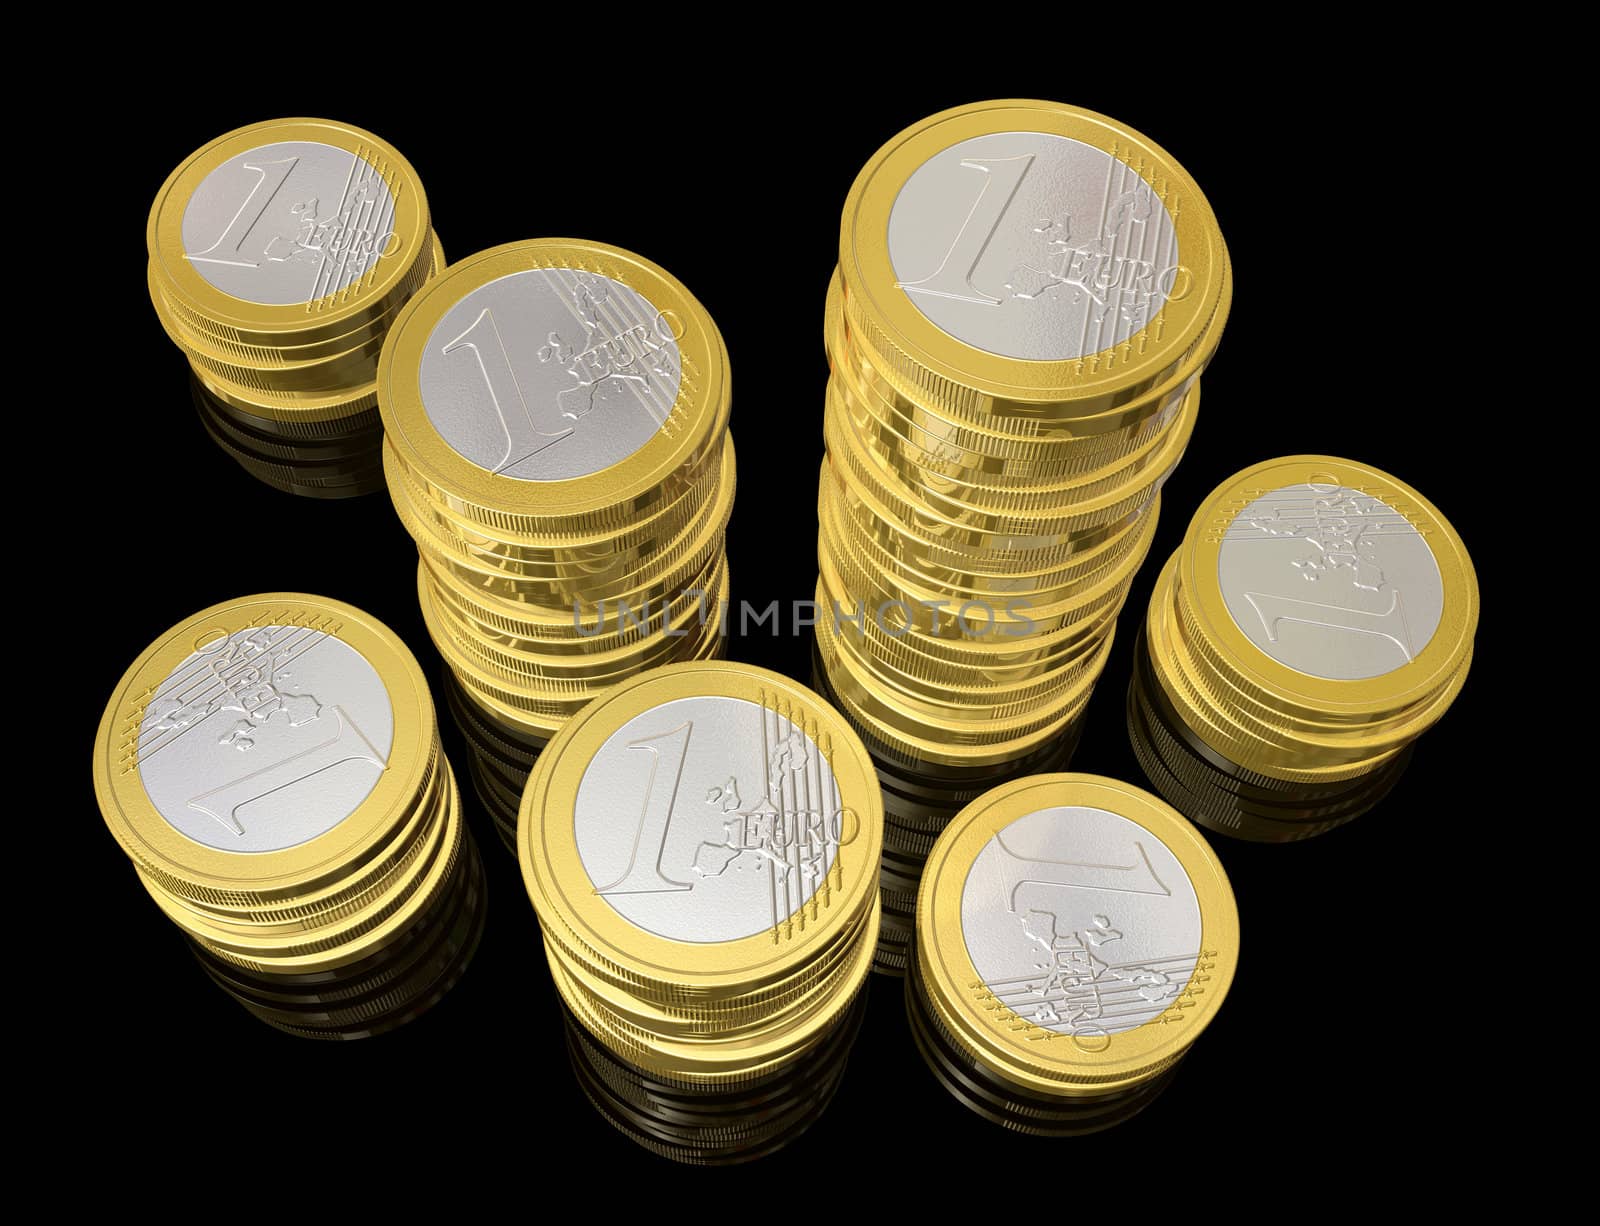 One euro coins by daboost